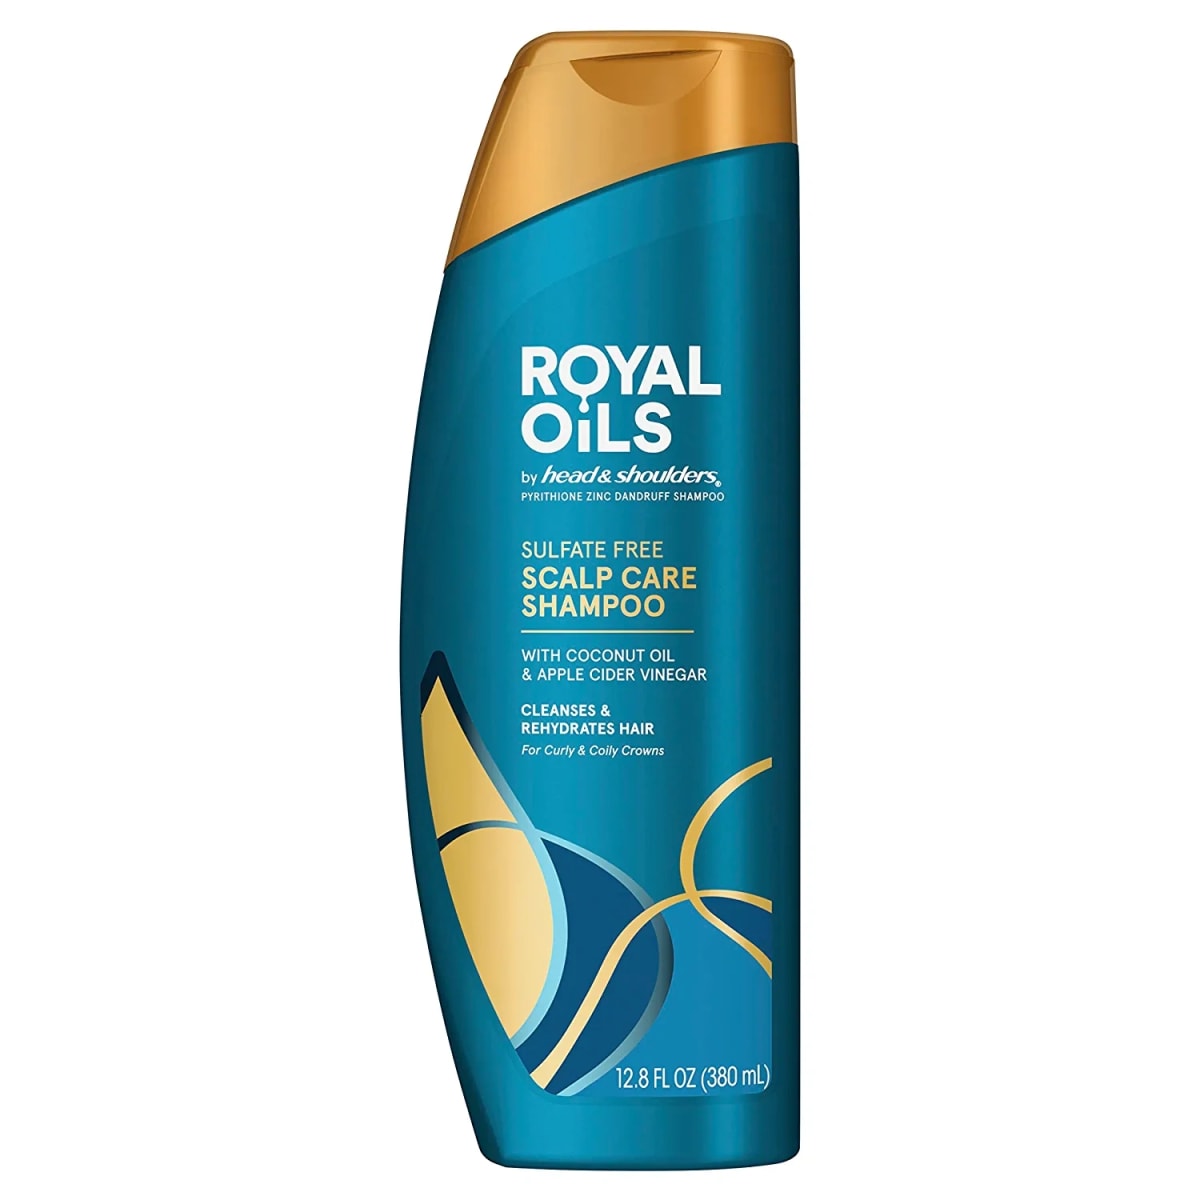 Royal Oils Sulfate-Free Scalp Care Anti-Dandruff Shampoo for Natural, Curly, and Coily Hair, with Coconut Oil and Apple Cider Vinegar, Paraben Free, 12.8 Fl Oz